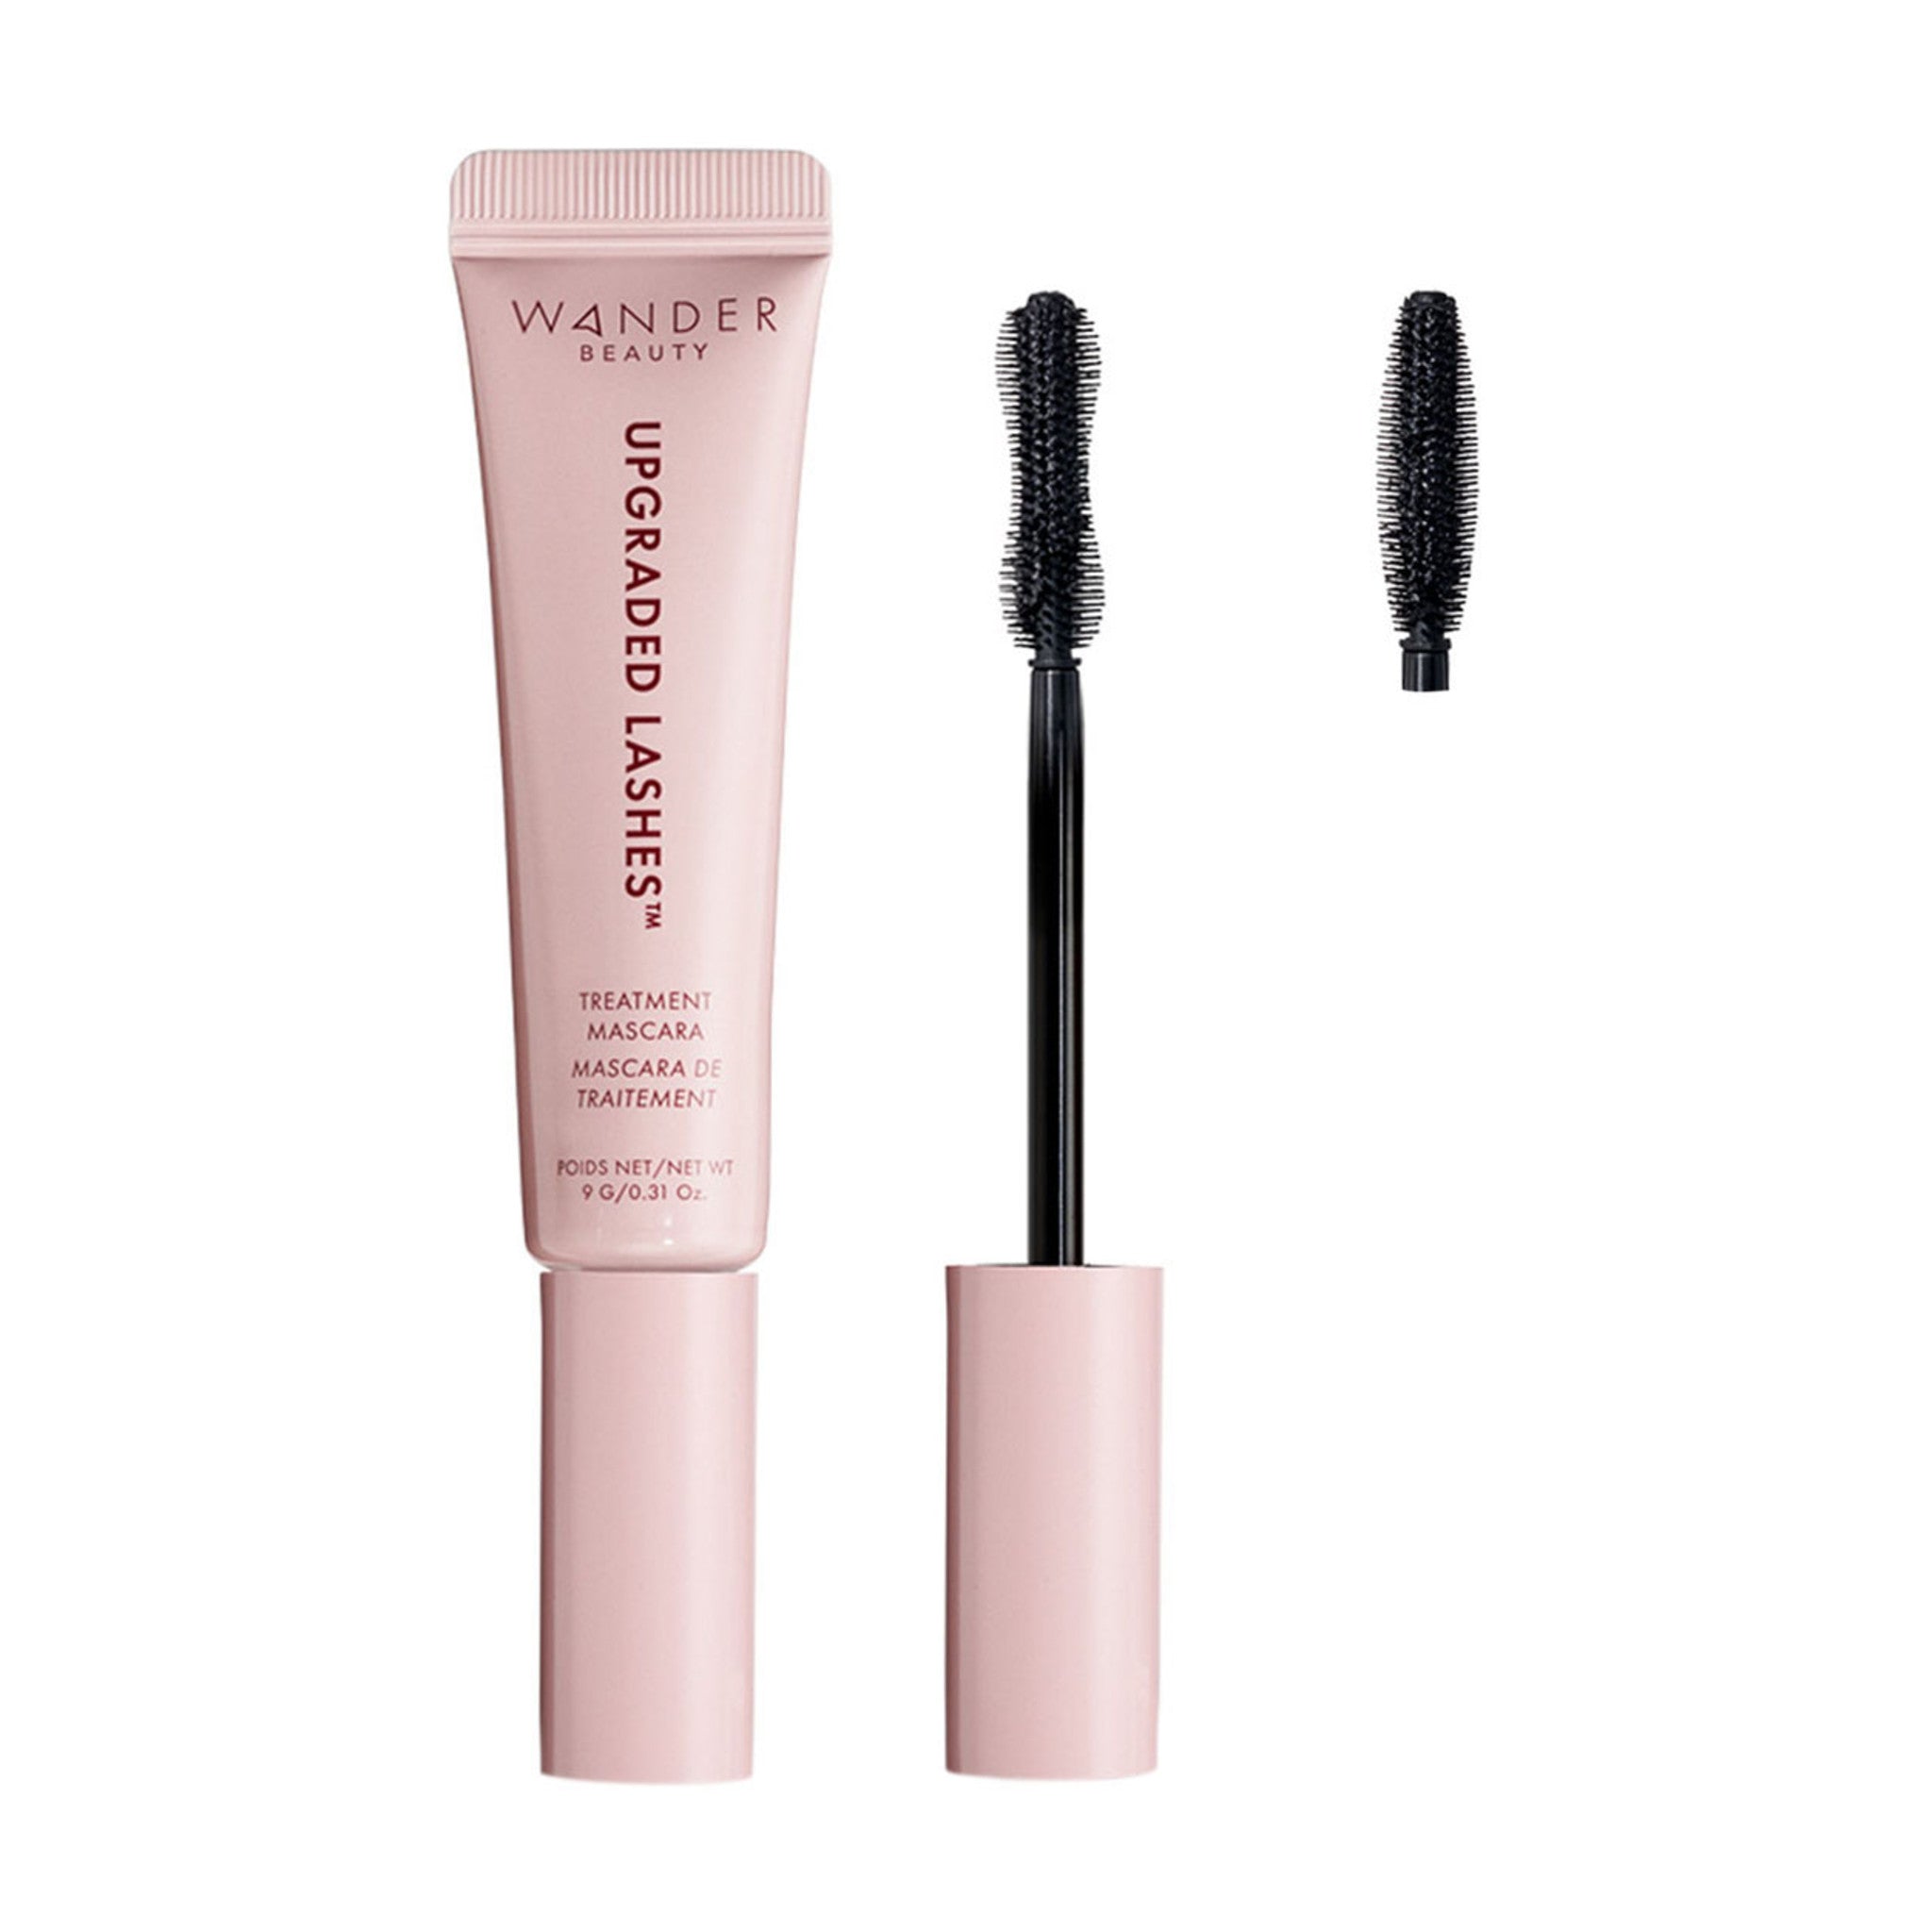 Wander Beauty Upgraded Lashes Treatment Mascara main image. This product is in the color black